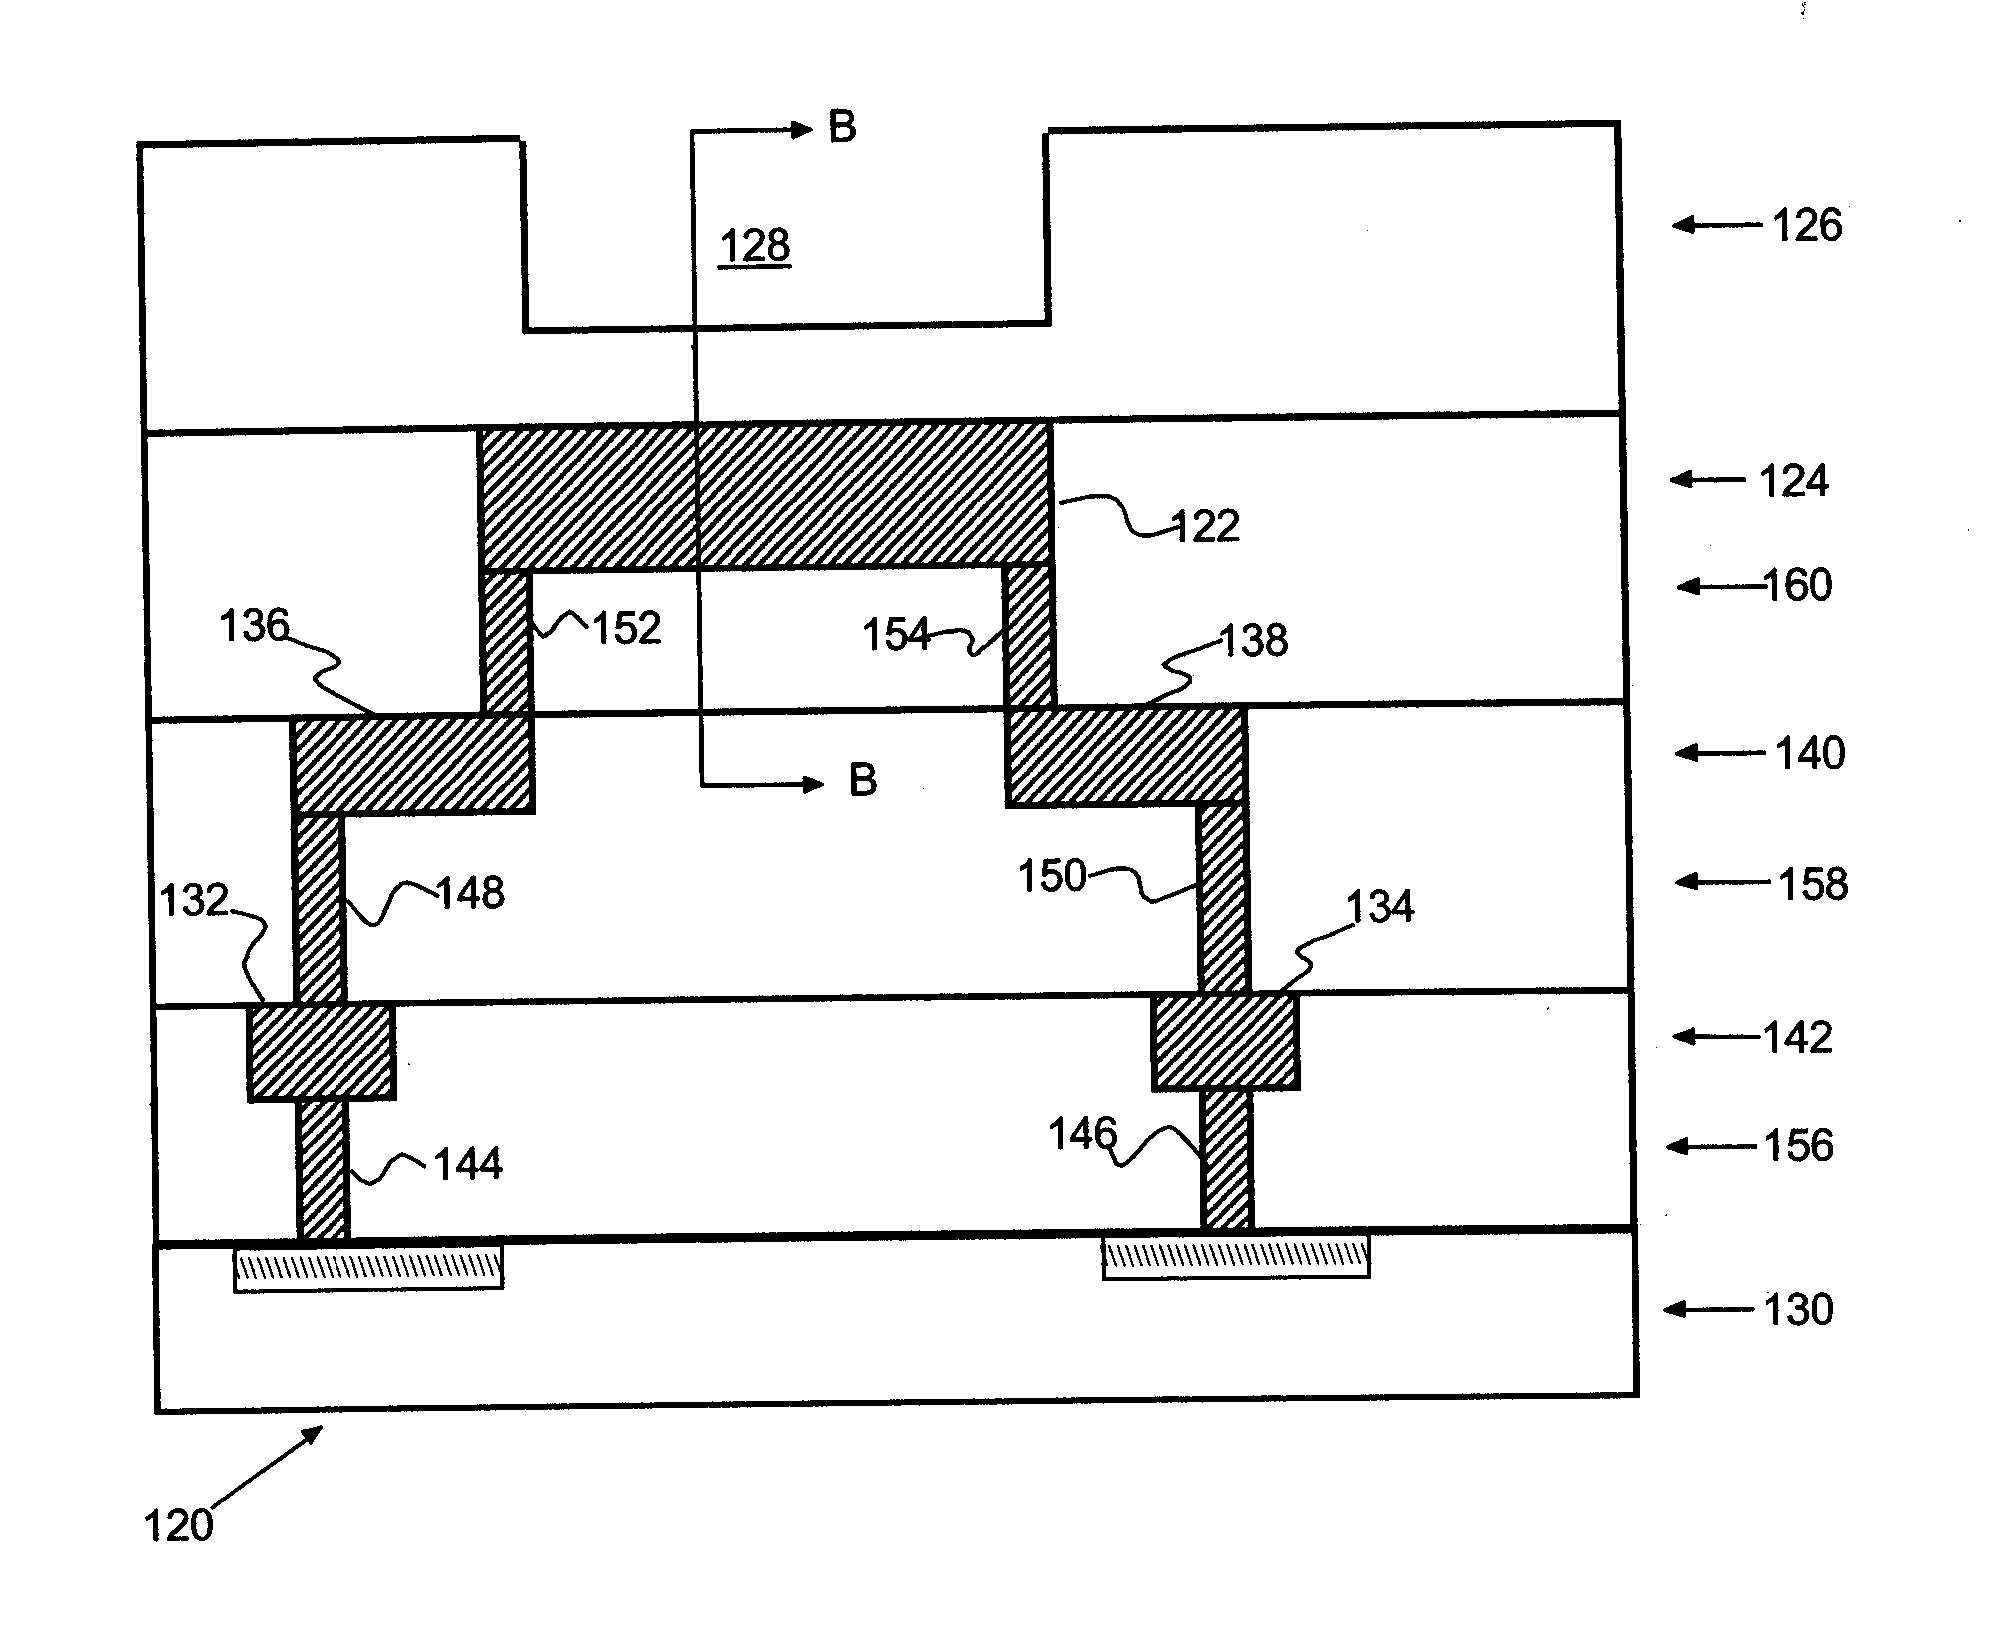 Integrated circuit (IC) with on-chip programmable fuses